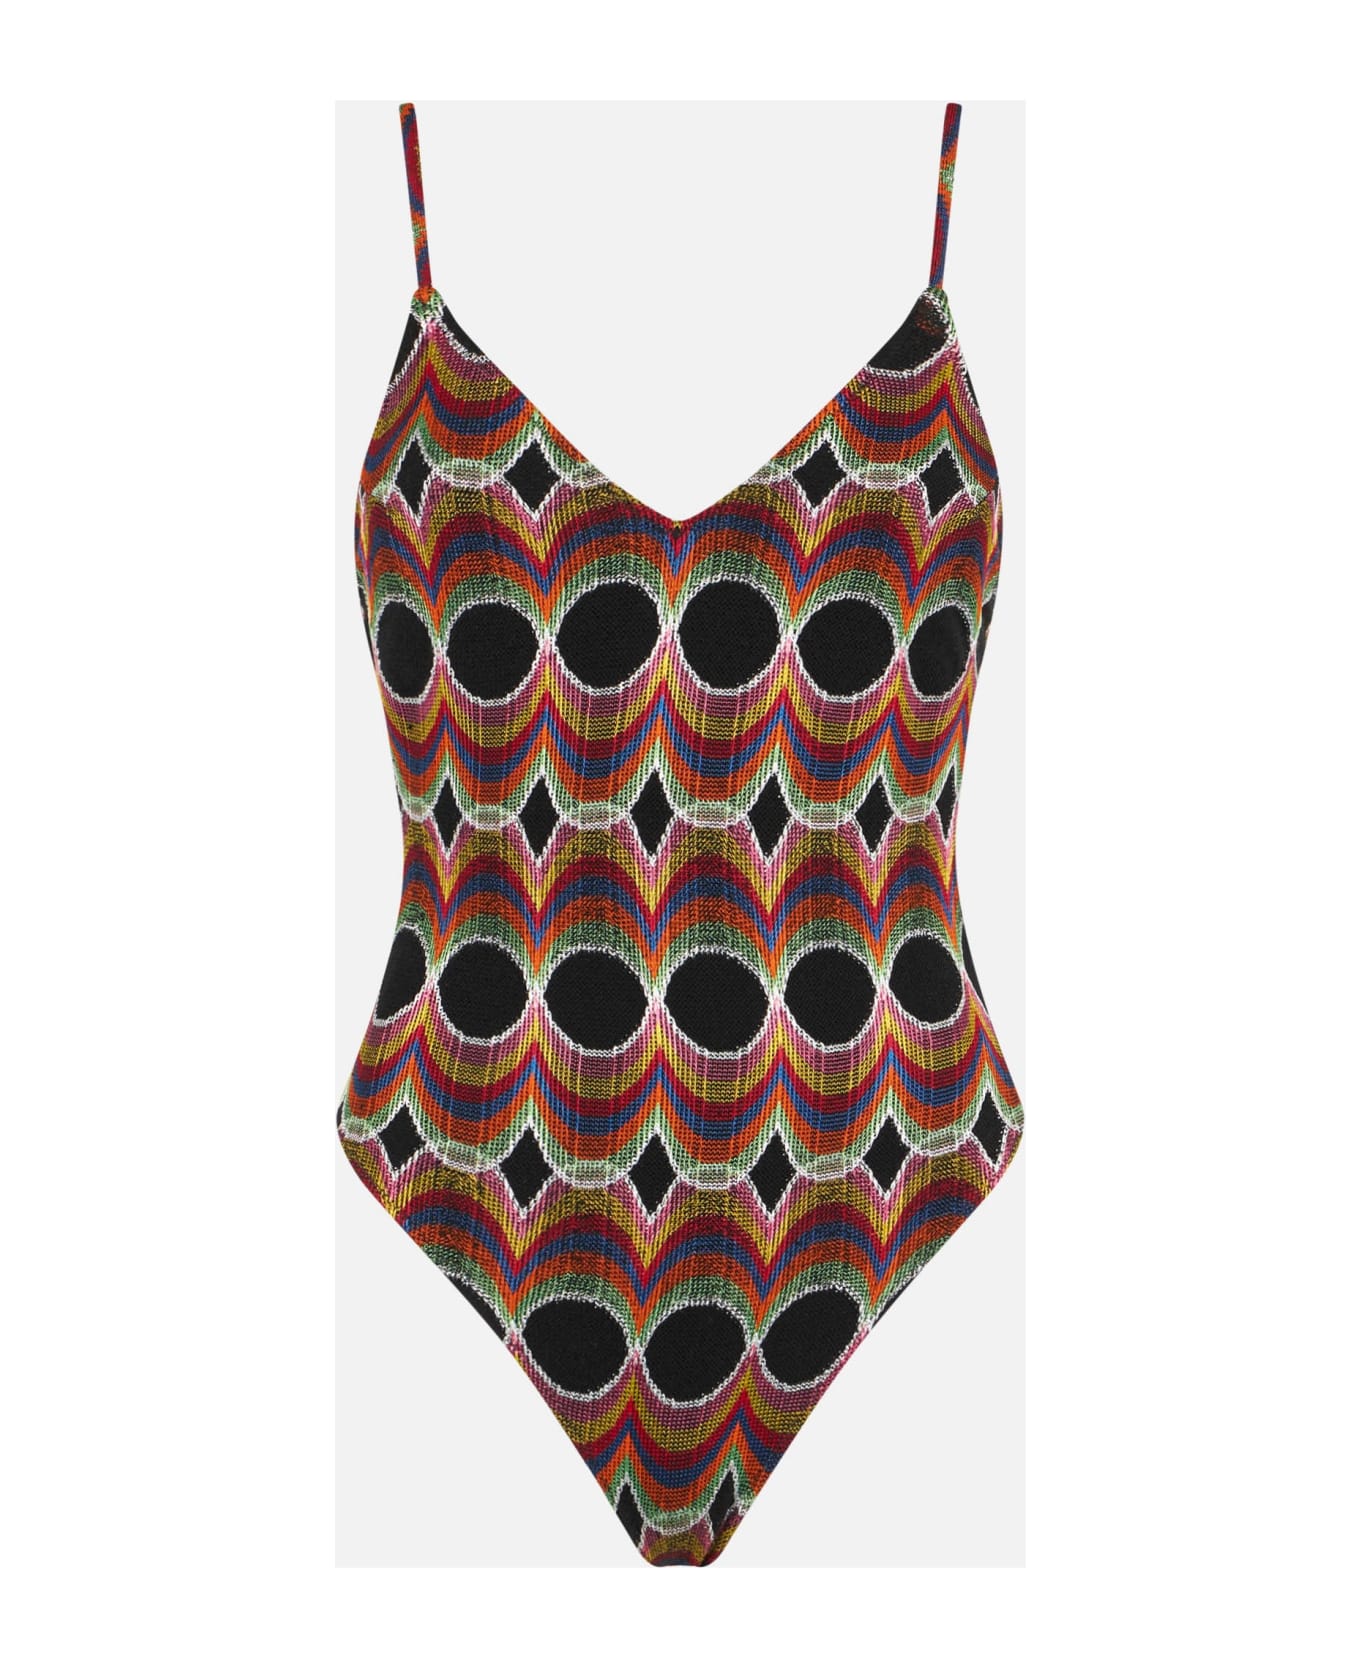 MC2 Saint Barth Woman One Piece Swimsuit With Pattern - BROWN